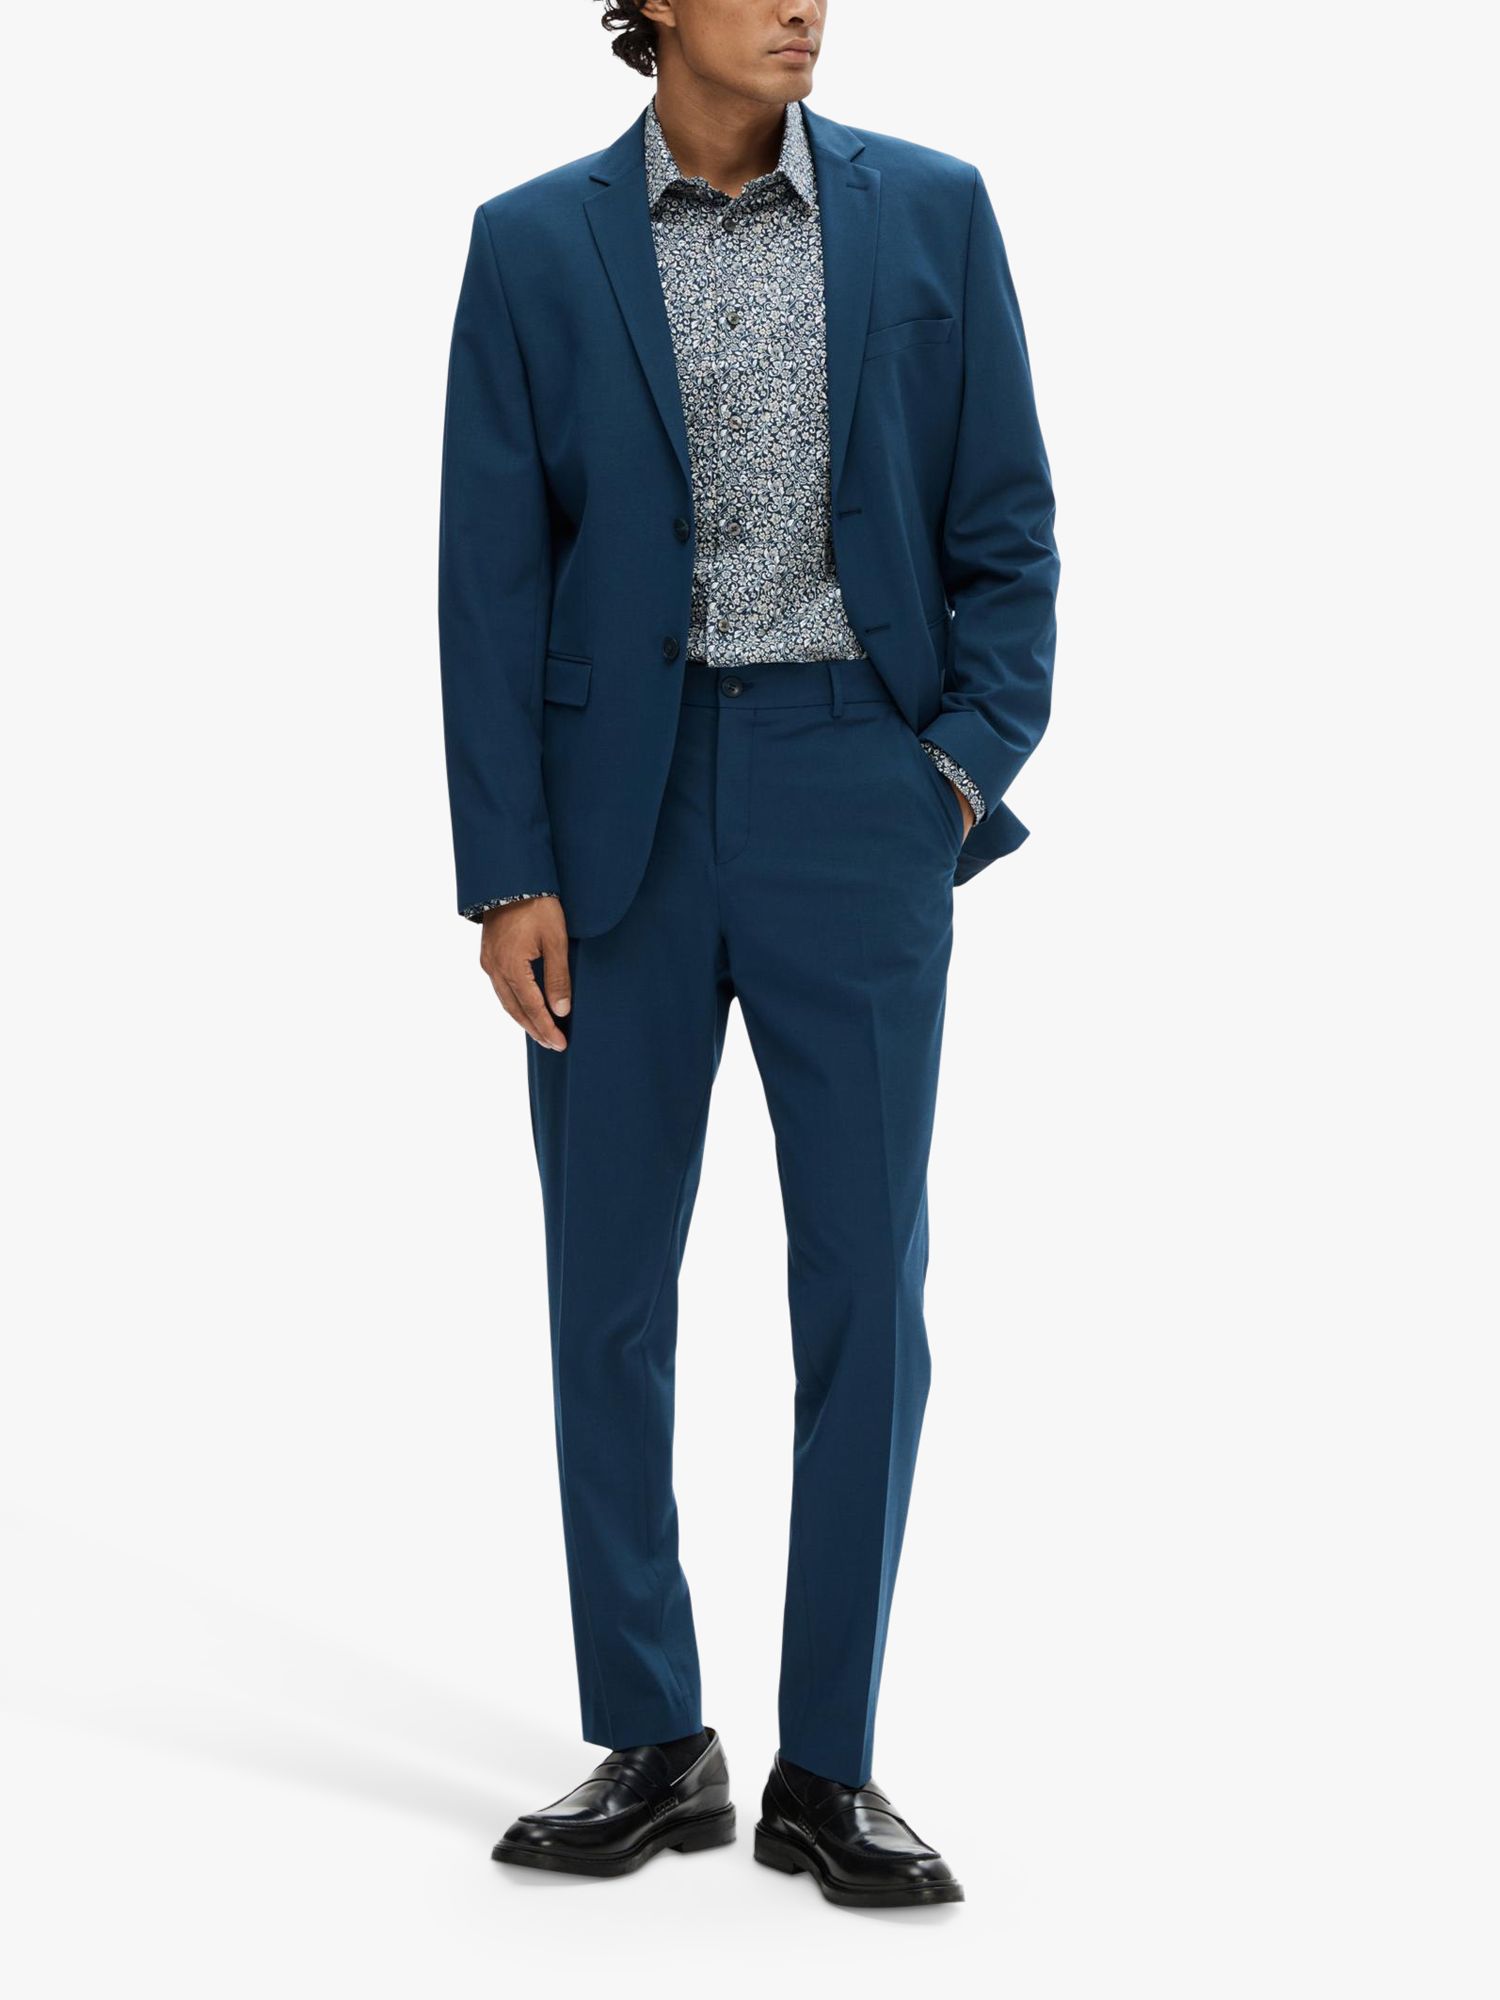 Buy SELECTED HOMME Liam Tailored Trousers, Blue Online at johnlewis.com